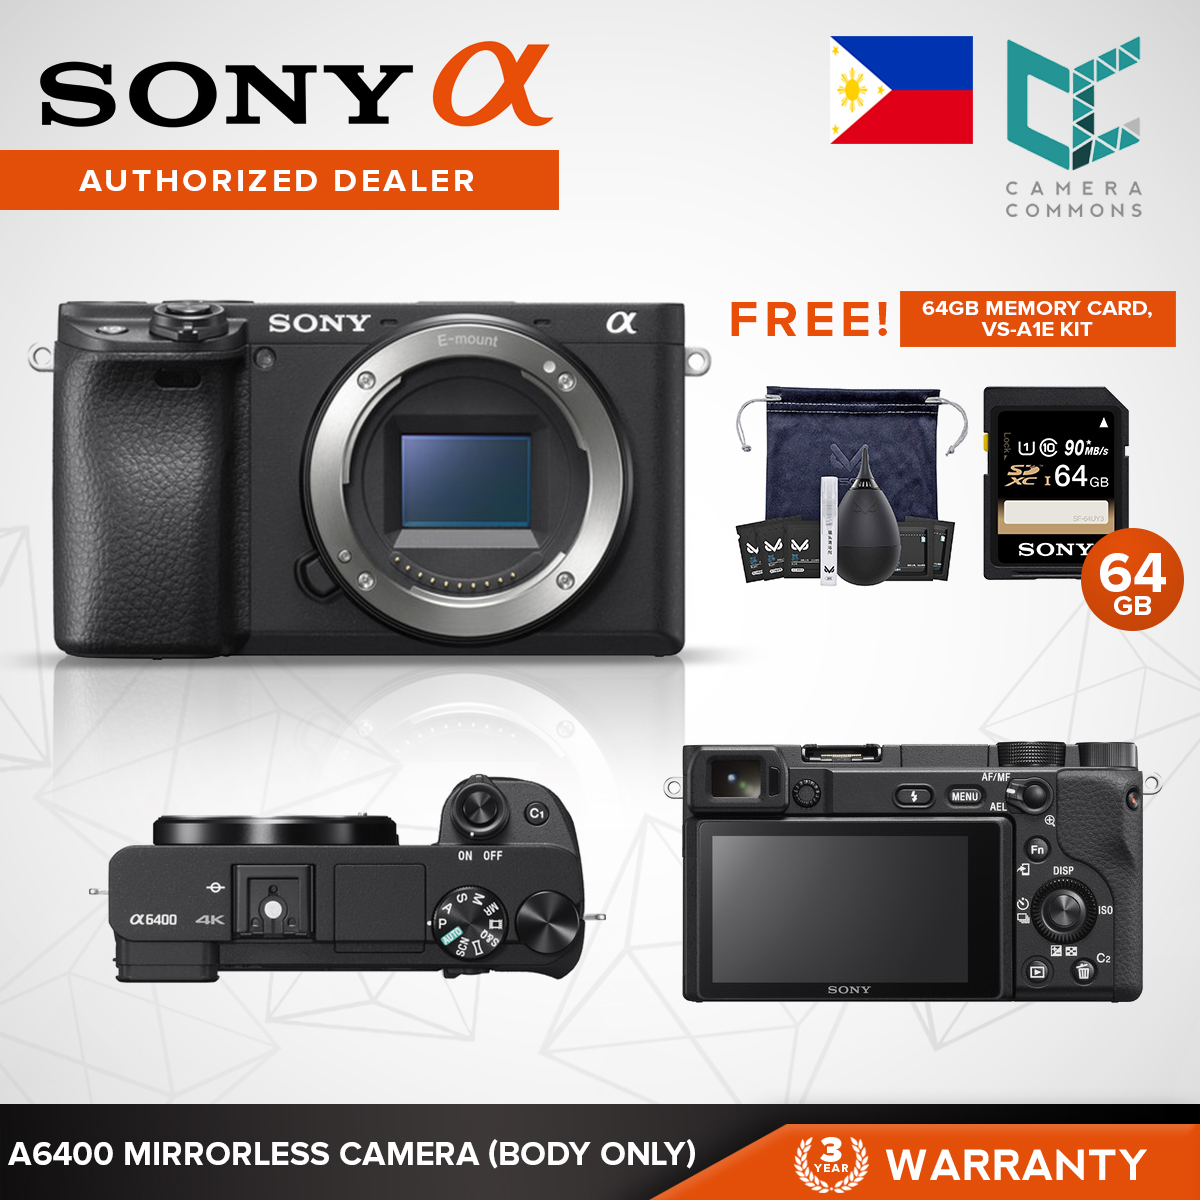 Sony Alpha a6400 Mirrorless Digital Camera with 16-50mm Lens ILCE